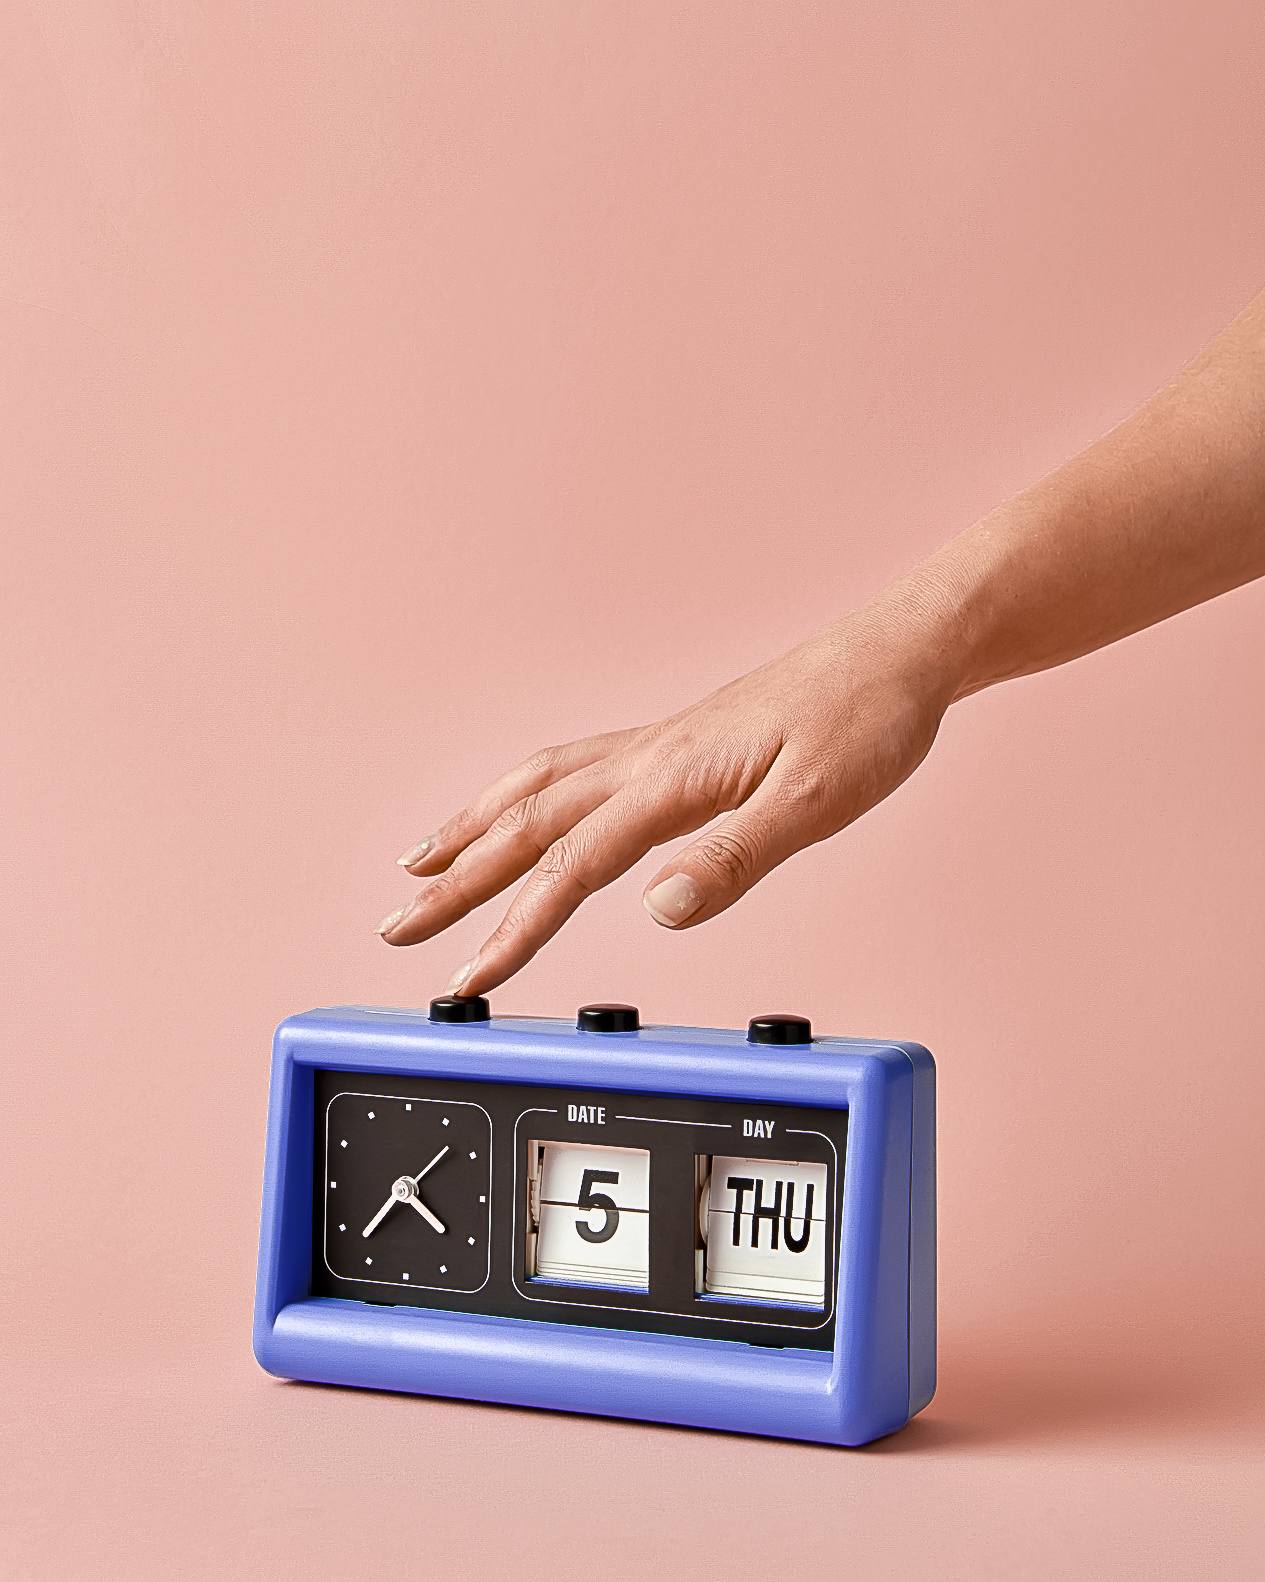 Woman's hand turns off the button on retro flip clock